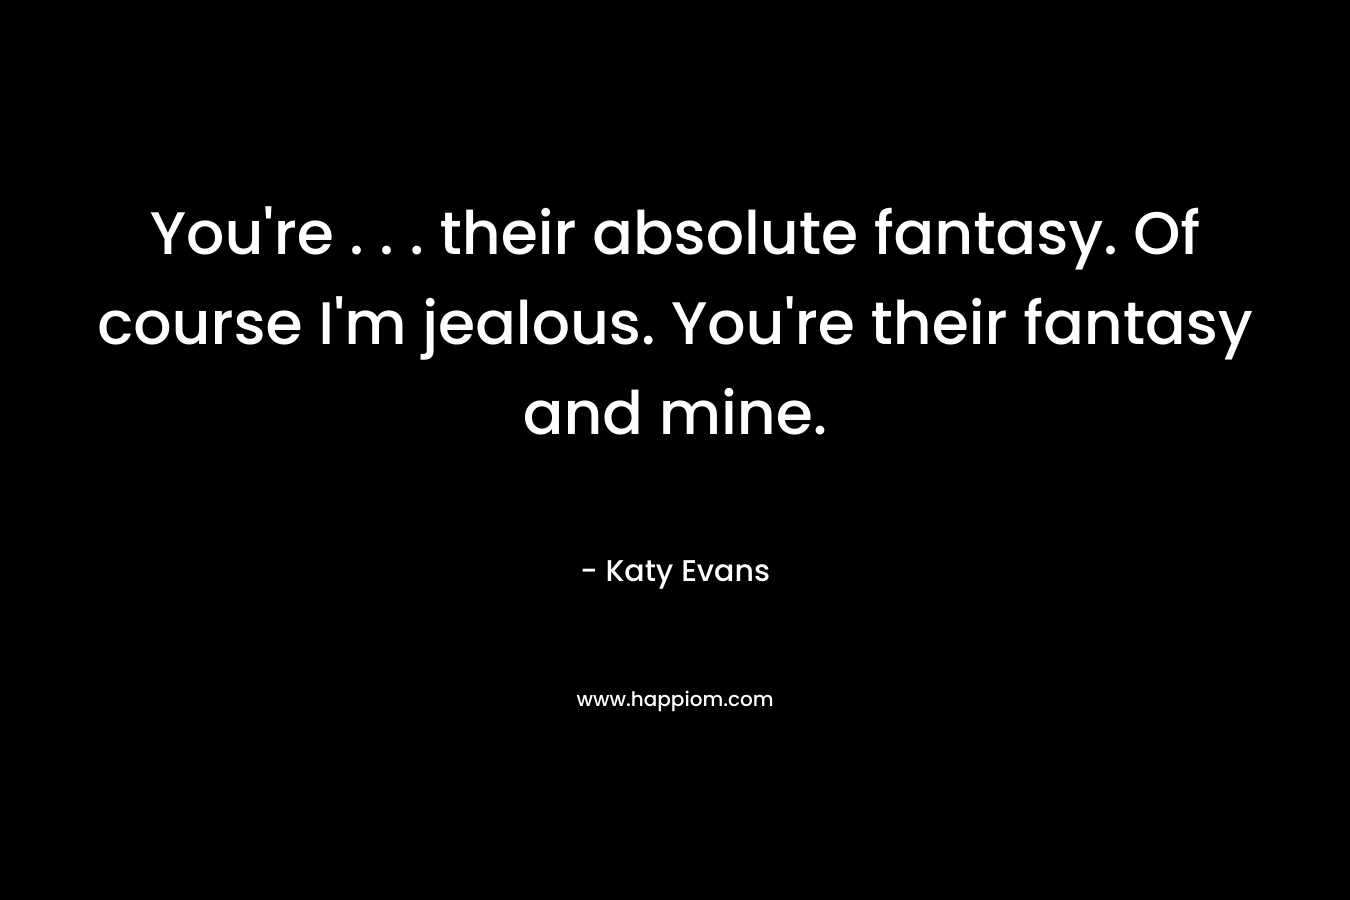 You’re . . . their absolute fantasy. Of course I’m jealous. You’re their fantasy and mine. – Katy Evans